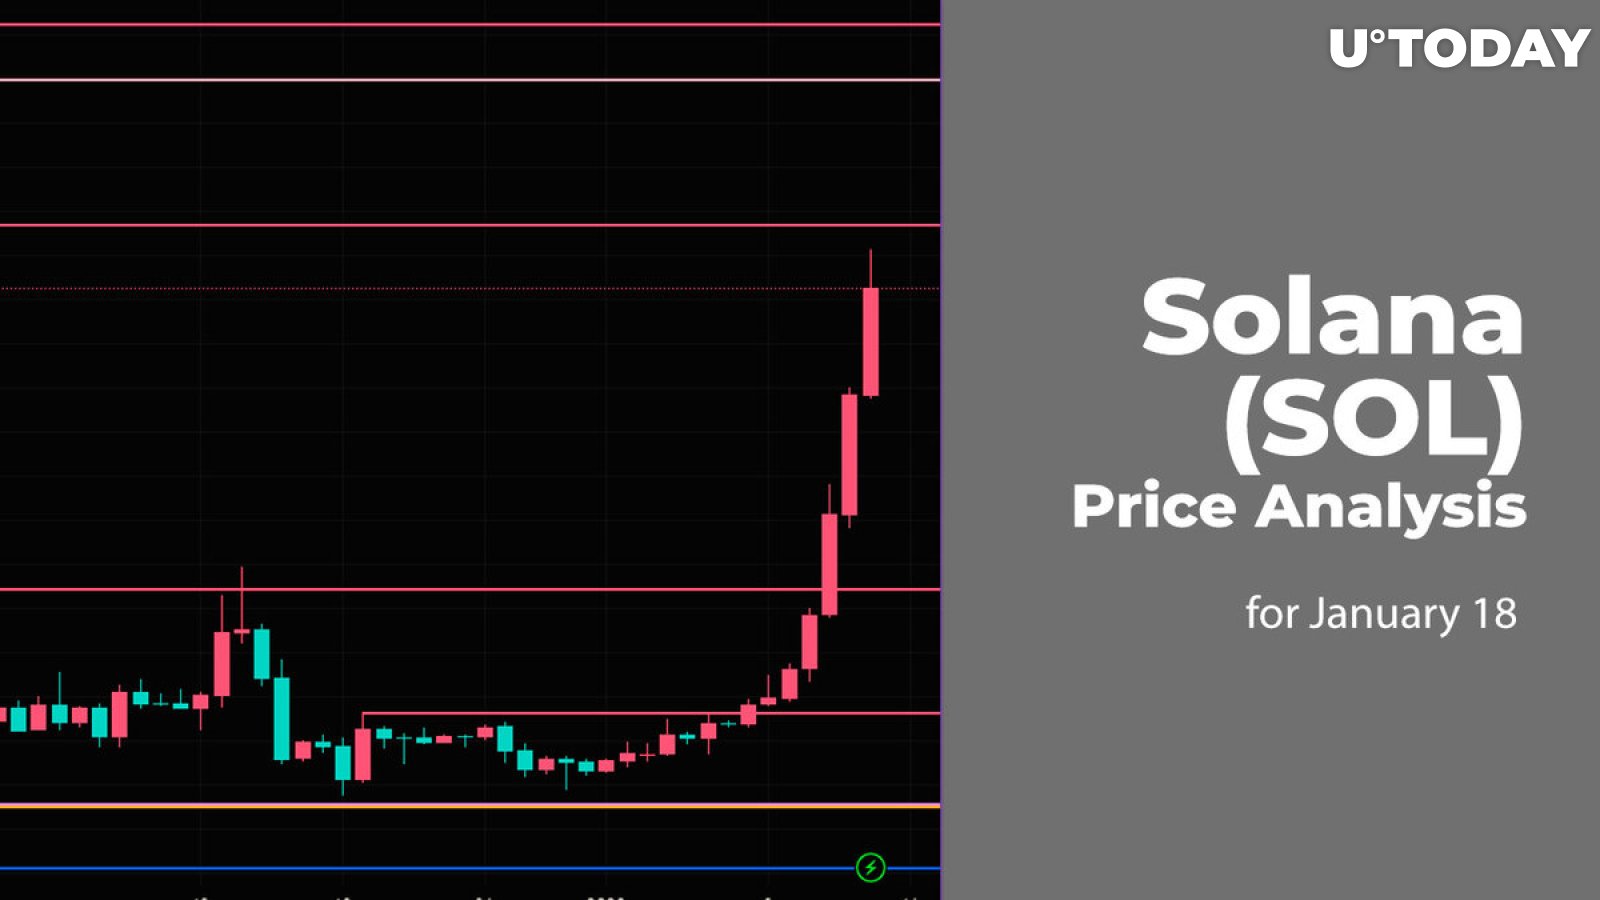 Solana (SOL) Price Analysis for January 18